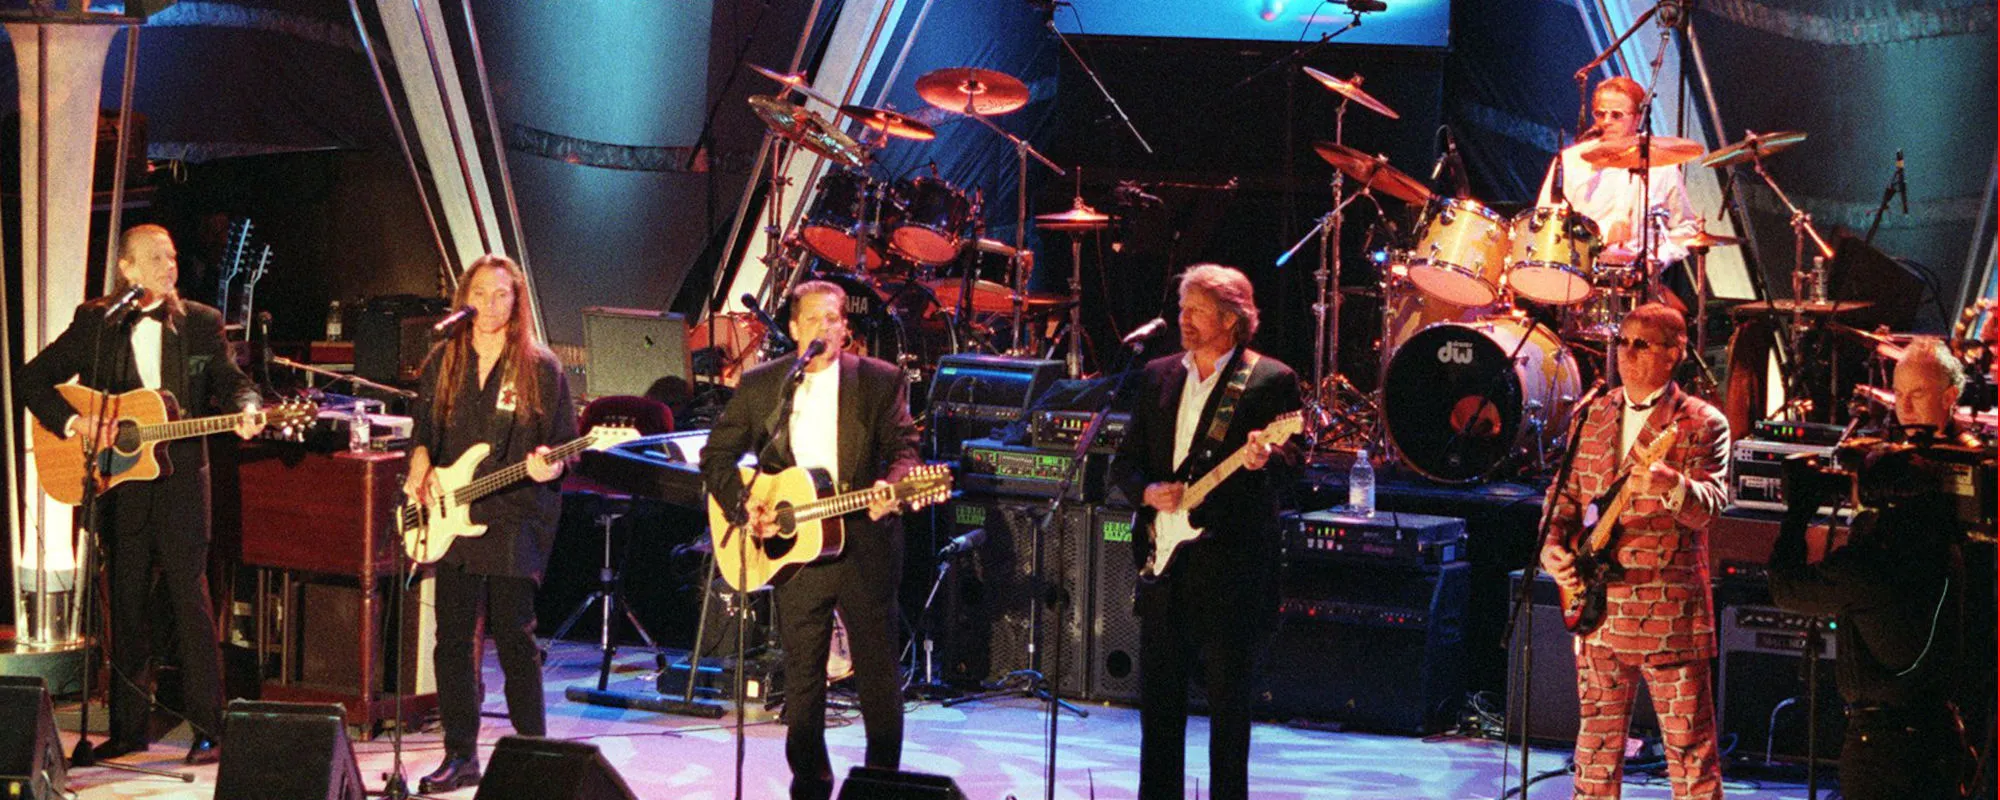 Remember When: The Eagles’ Induction into the Rock & Roll Hall of Fame